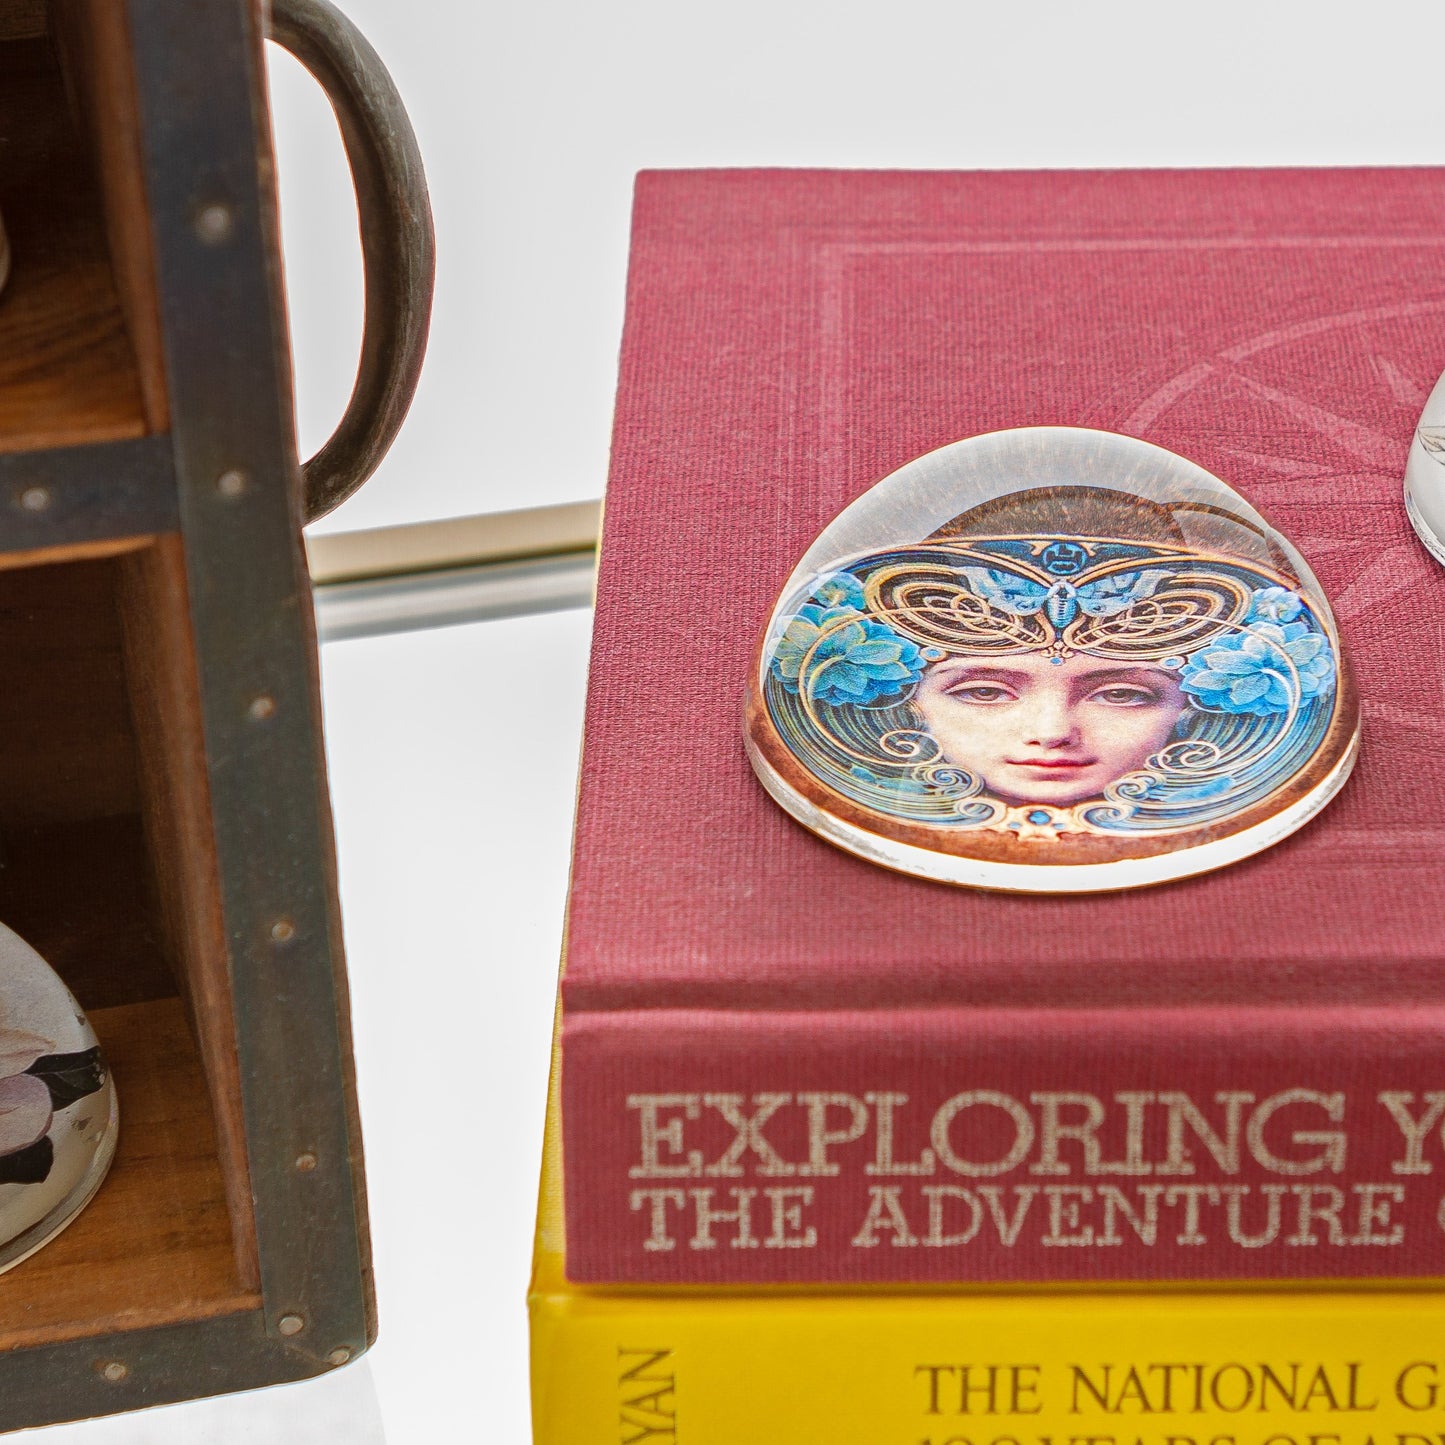 Crystal Domed Paperweight decoupaged with a Art Nouveau Woman's face shown  sitting on a stack of books